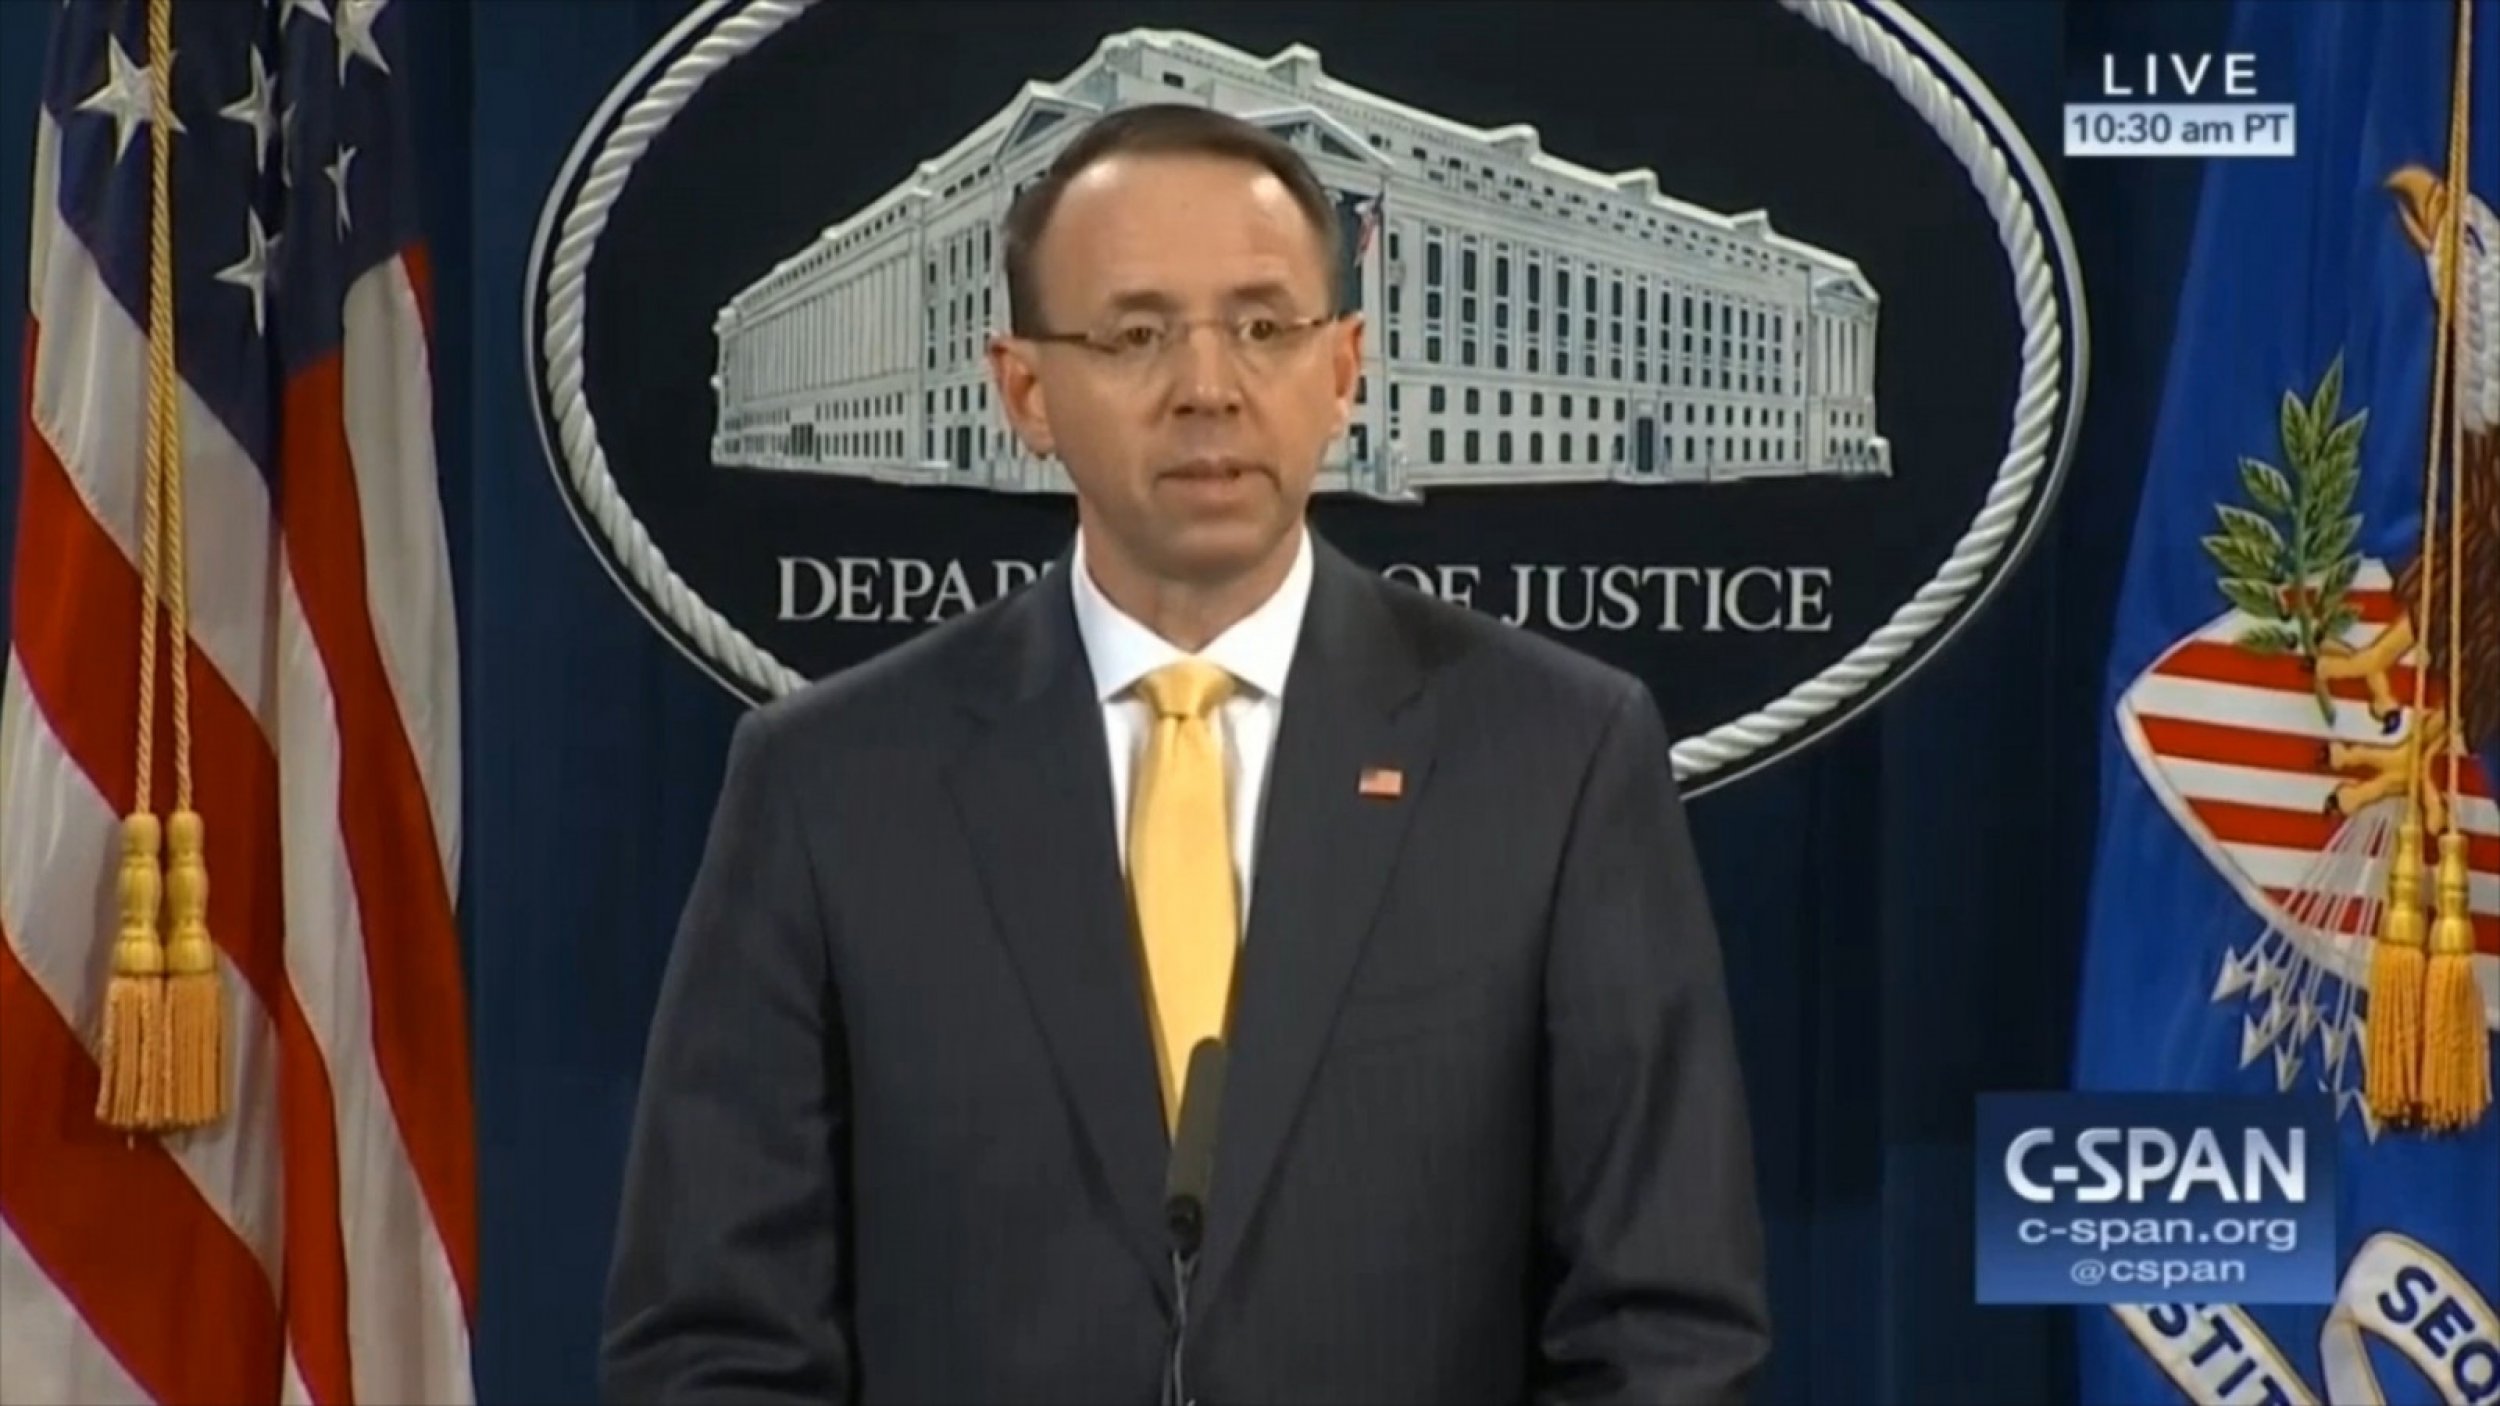 Deputy Attorney General Rod Rosenstein Gives Statement On Robert Mueller Indictment Of I3 Russian Nationals